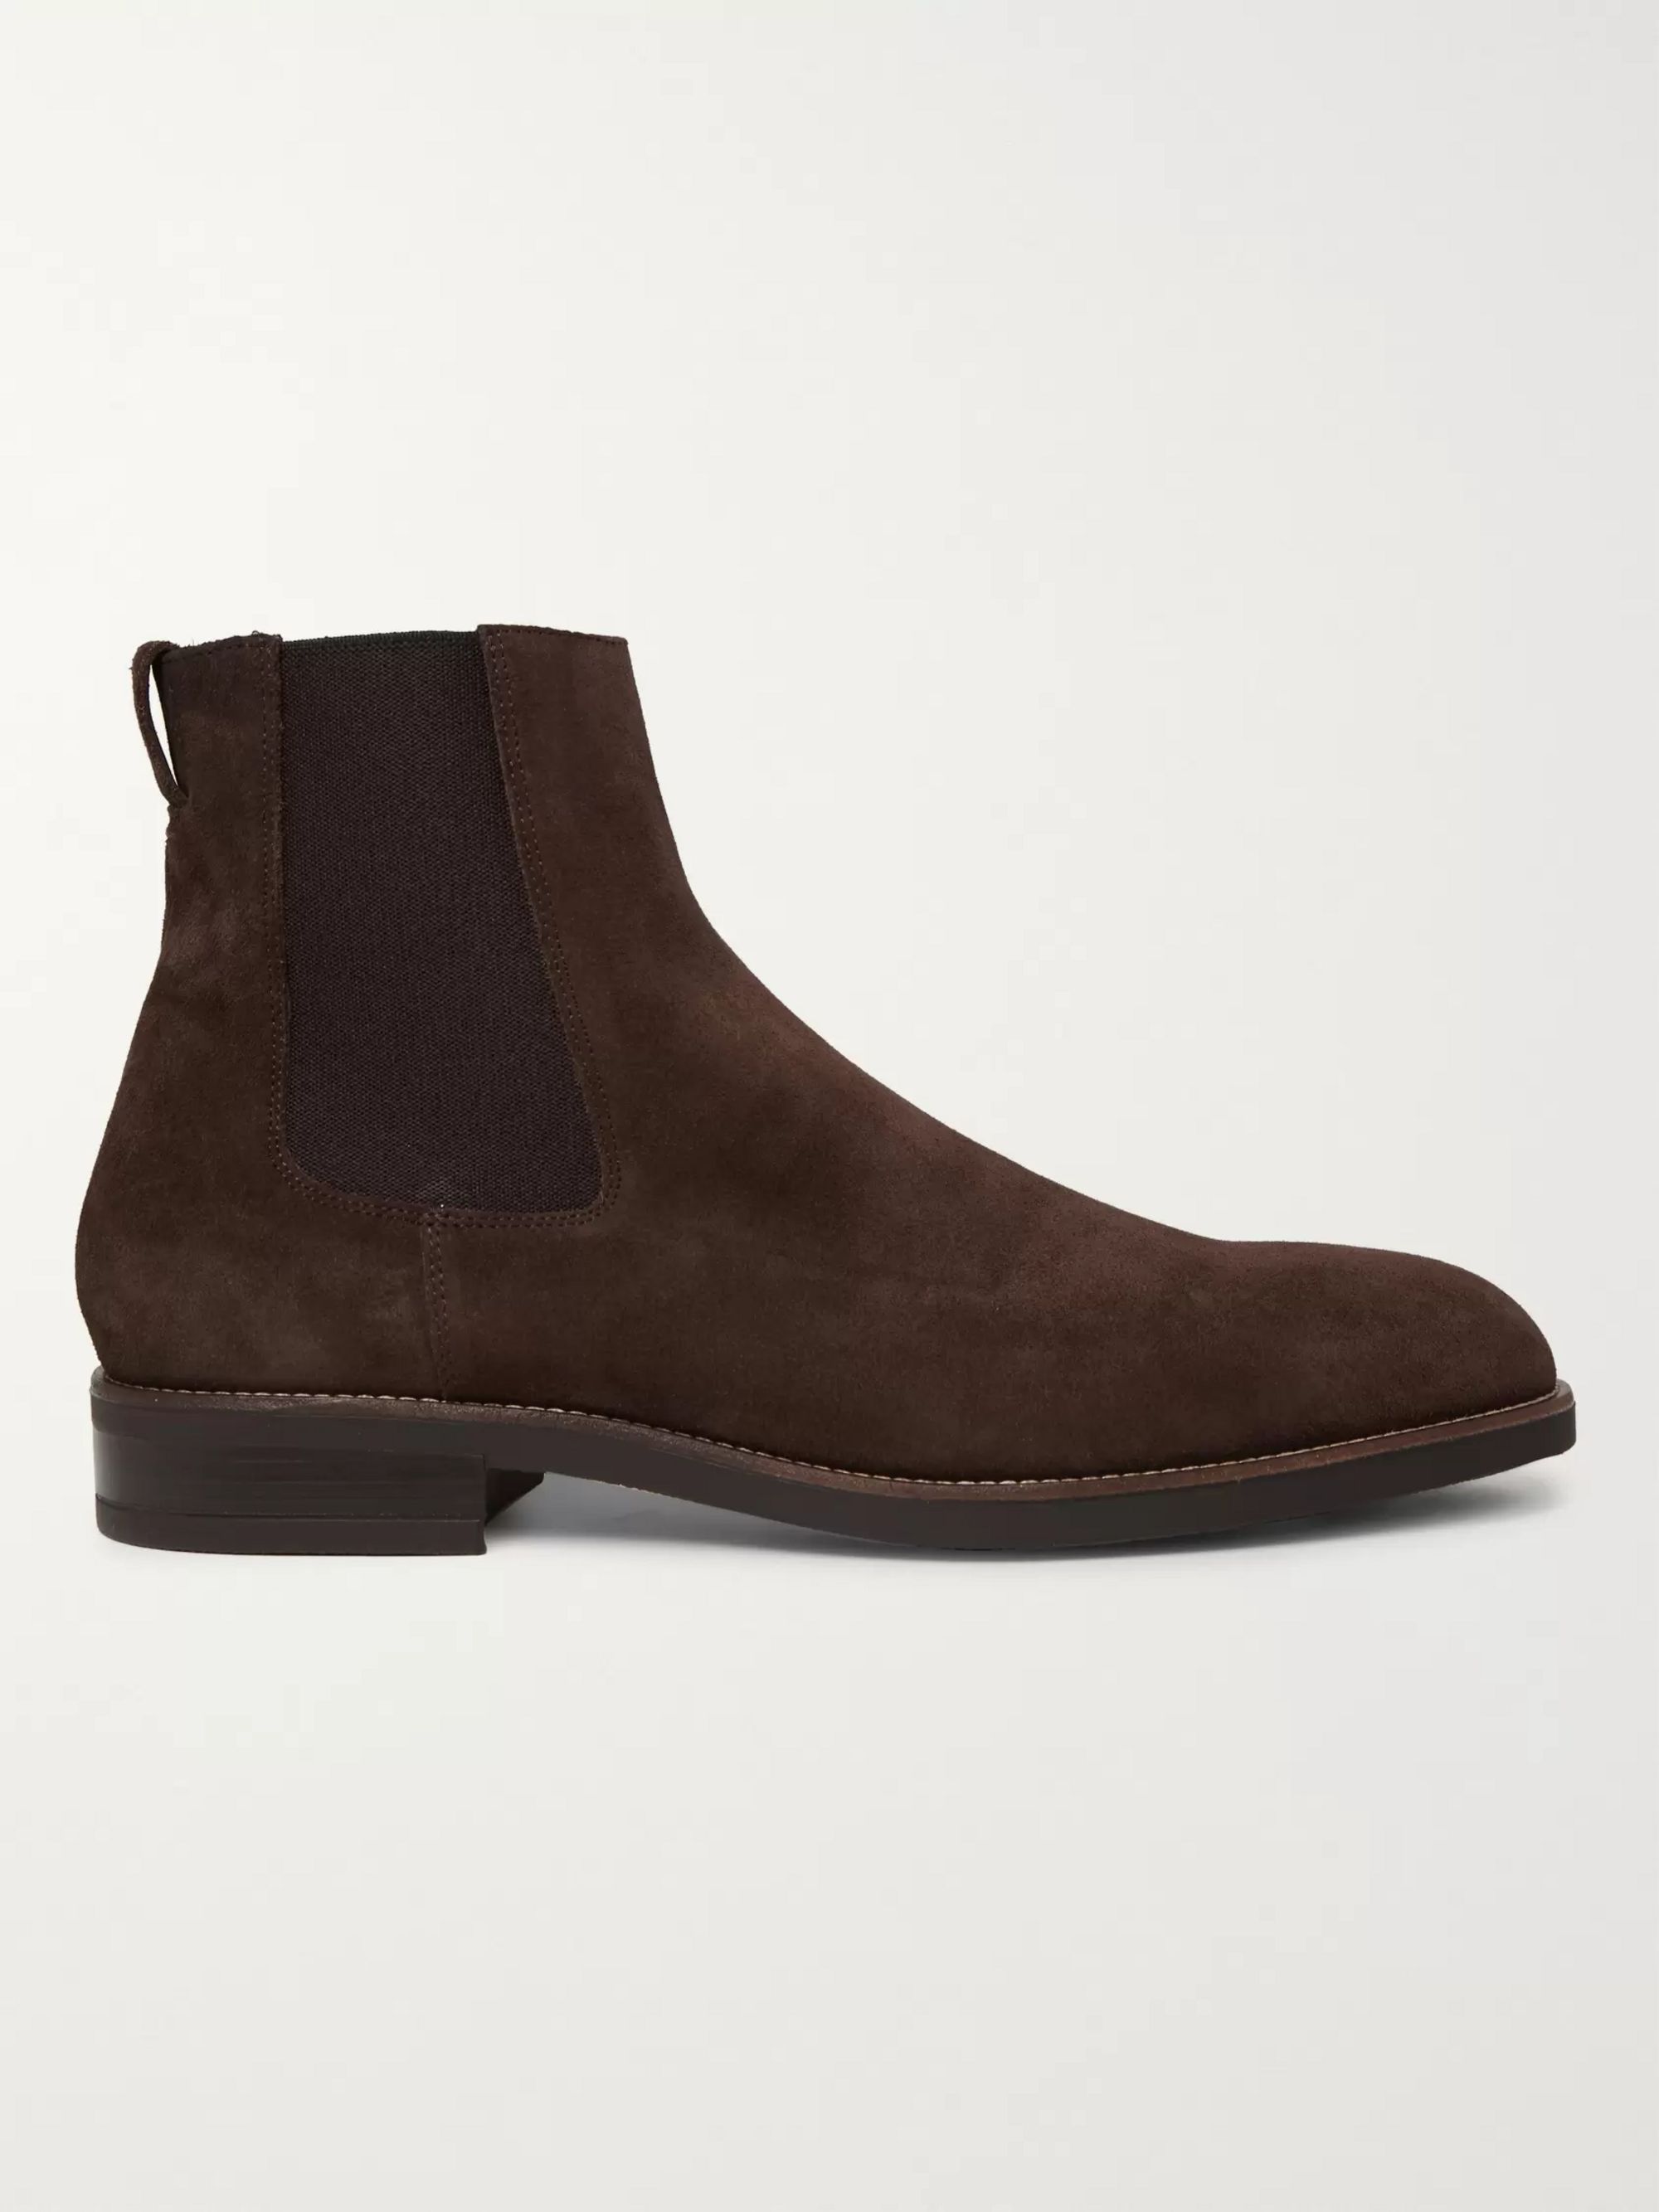 paul smith suede chelsea boots